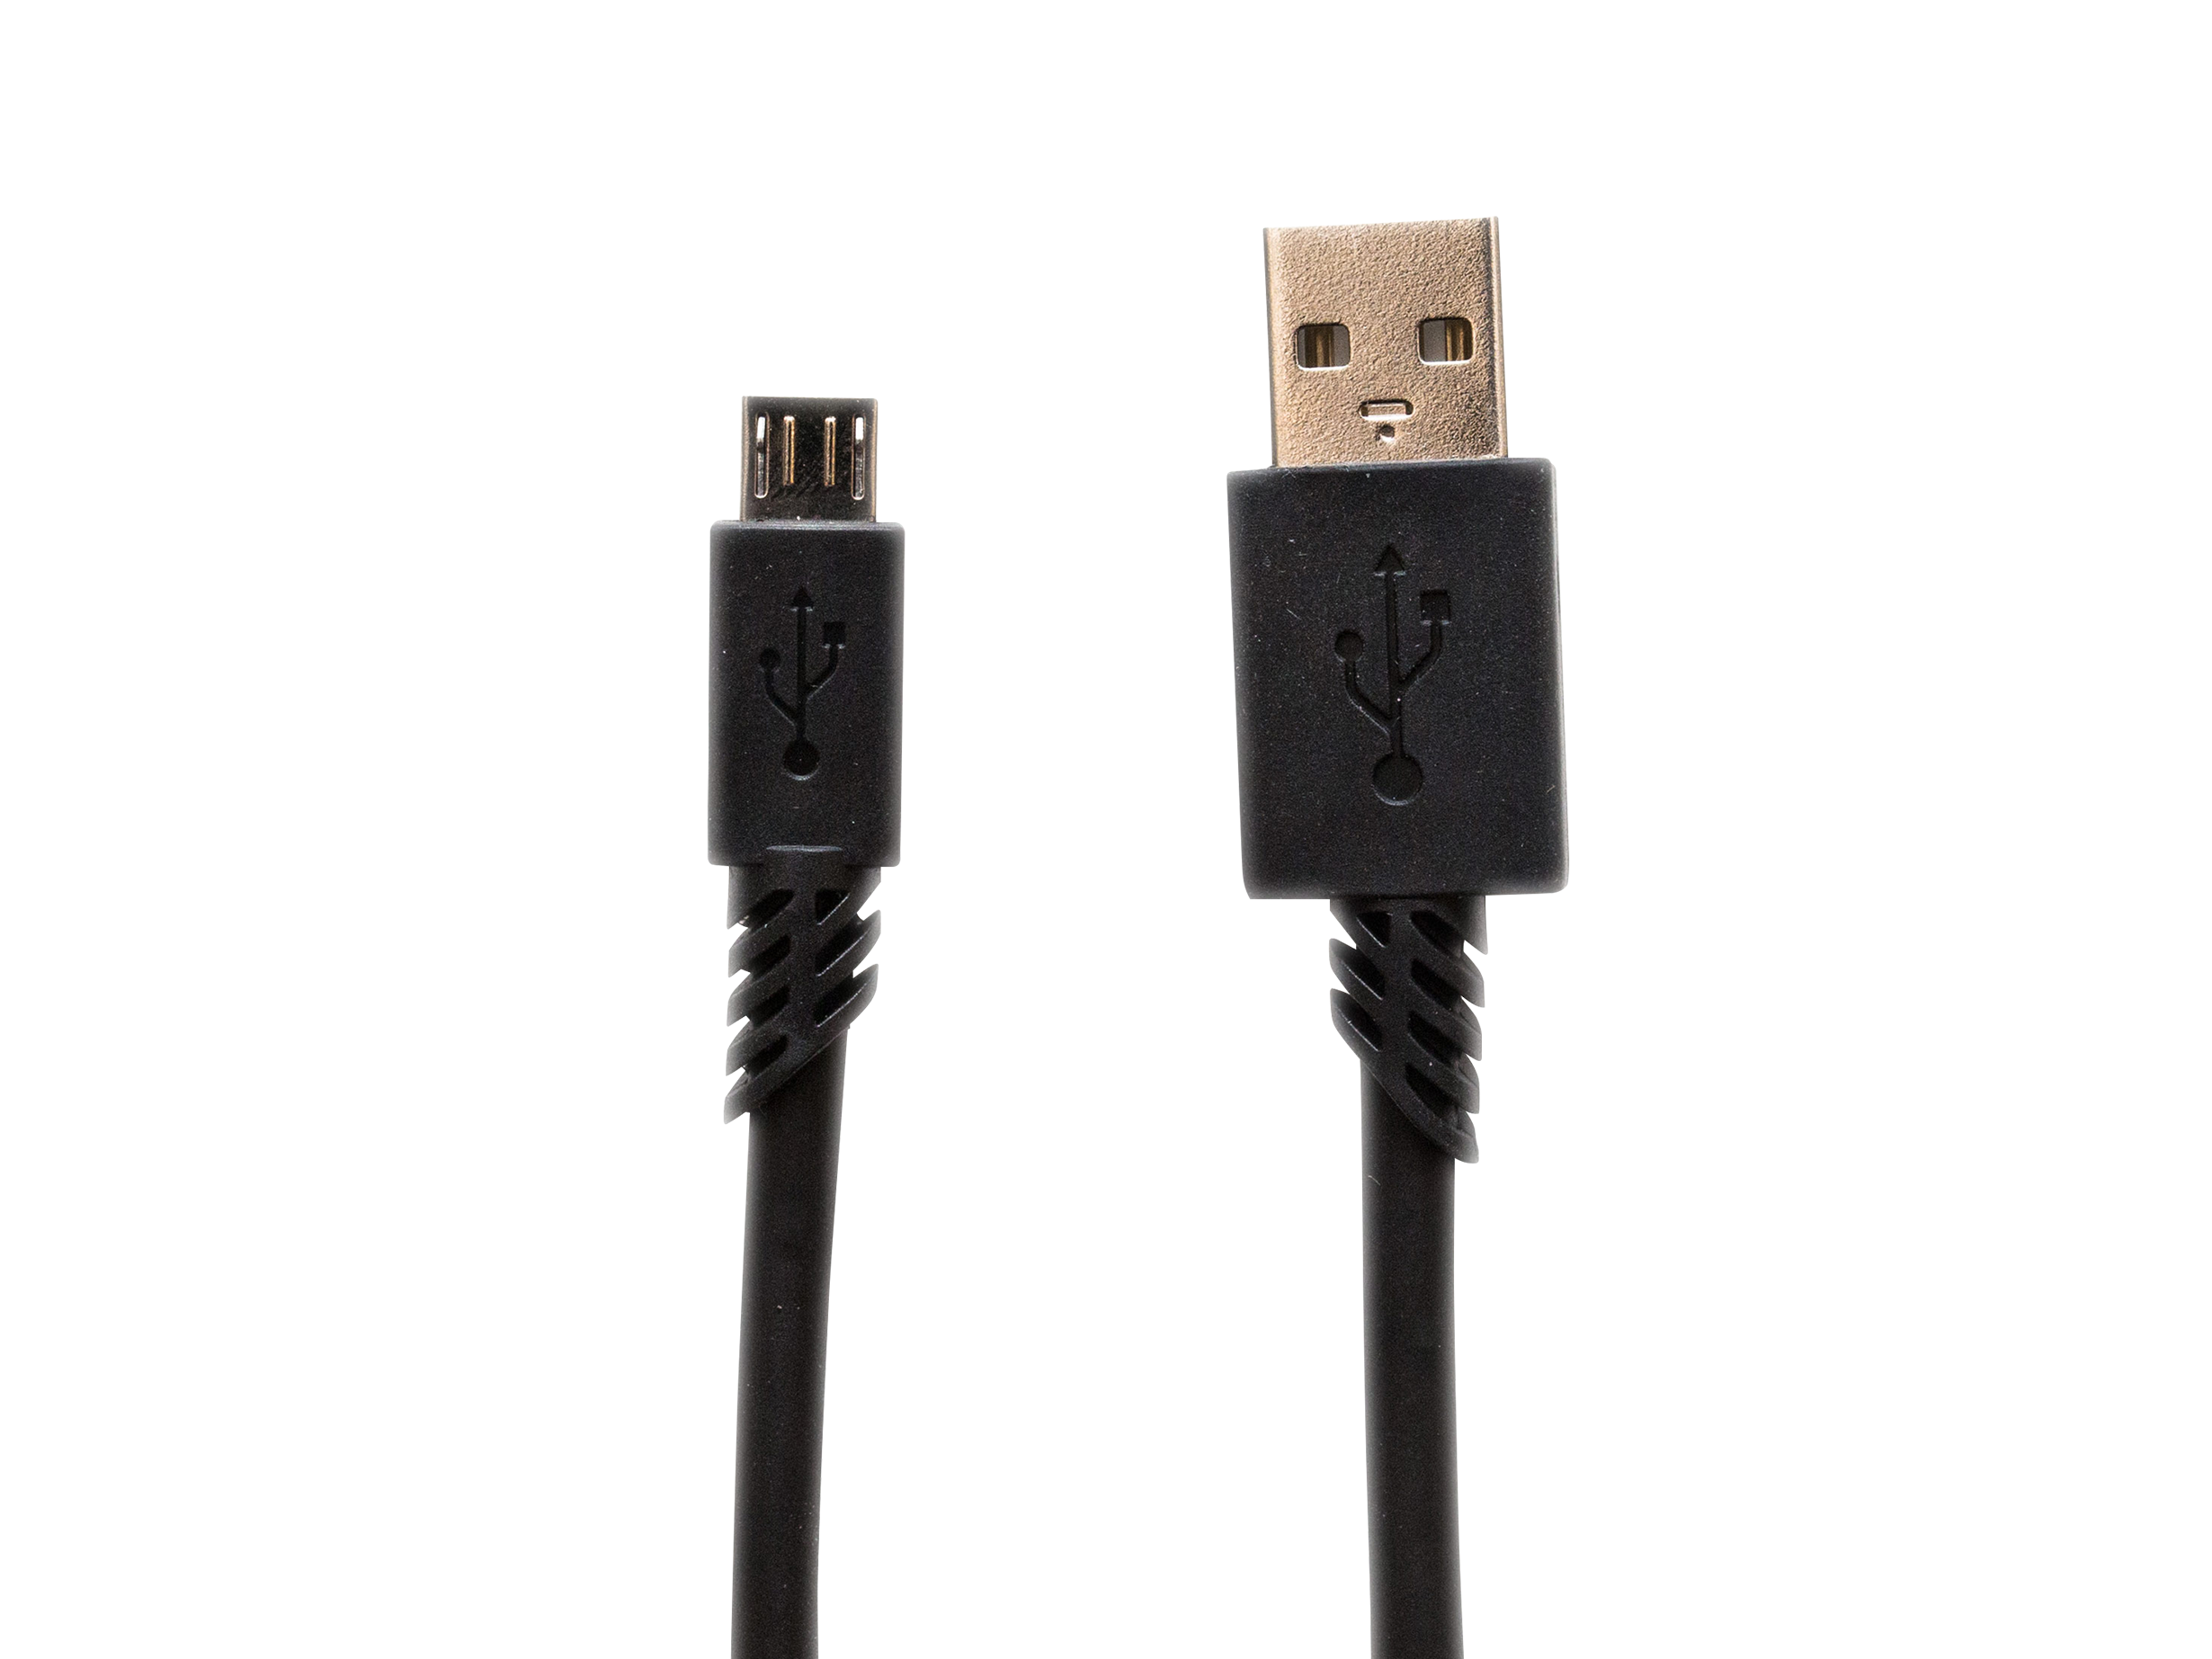 moth upside down rice ASTRO Micro USB Cable | ASTRO Gaming